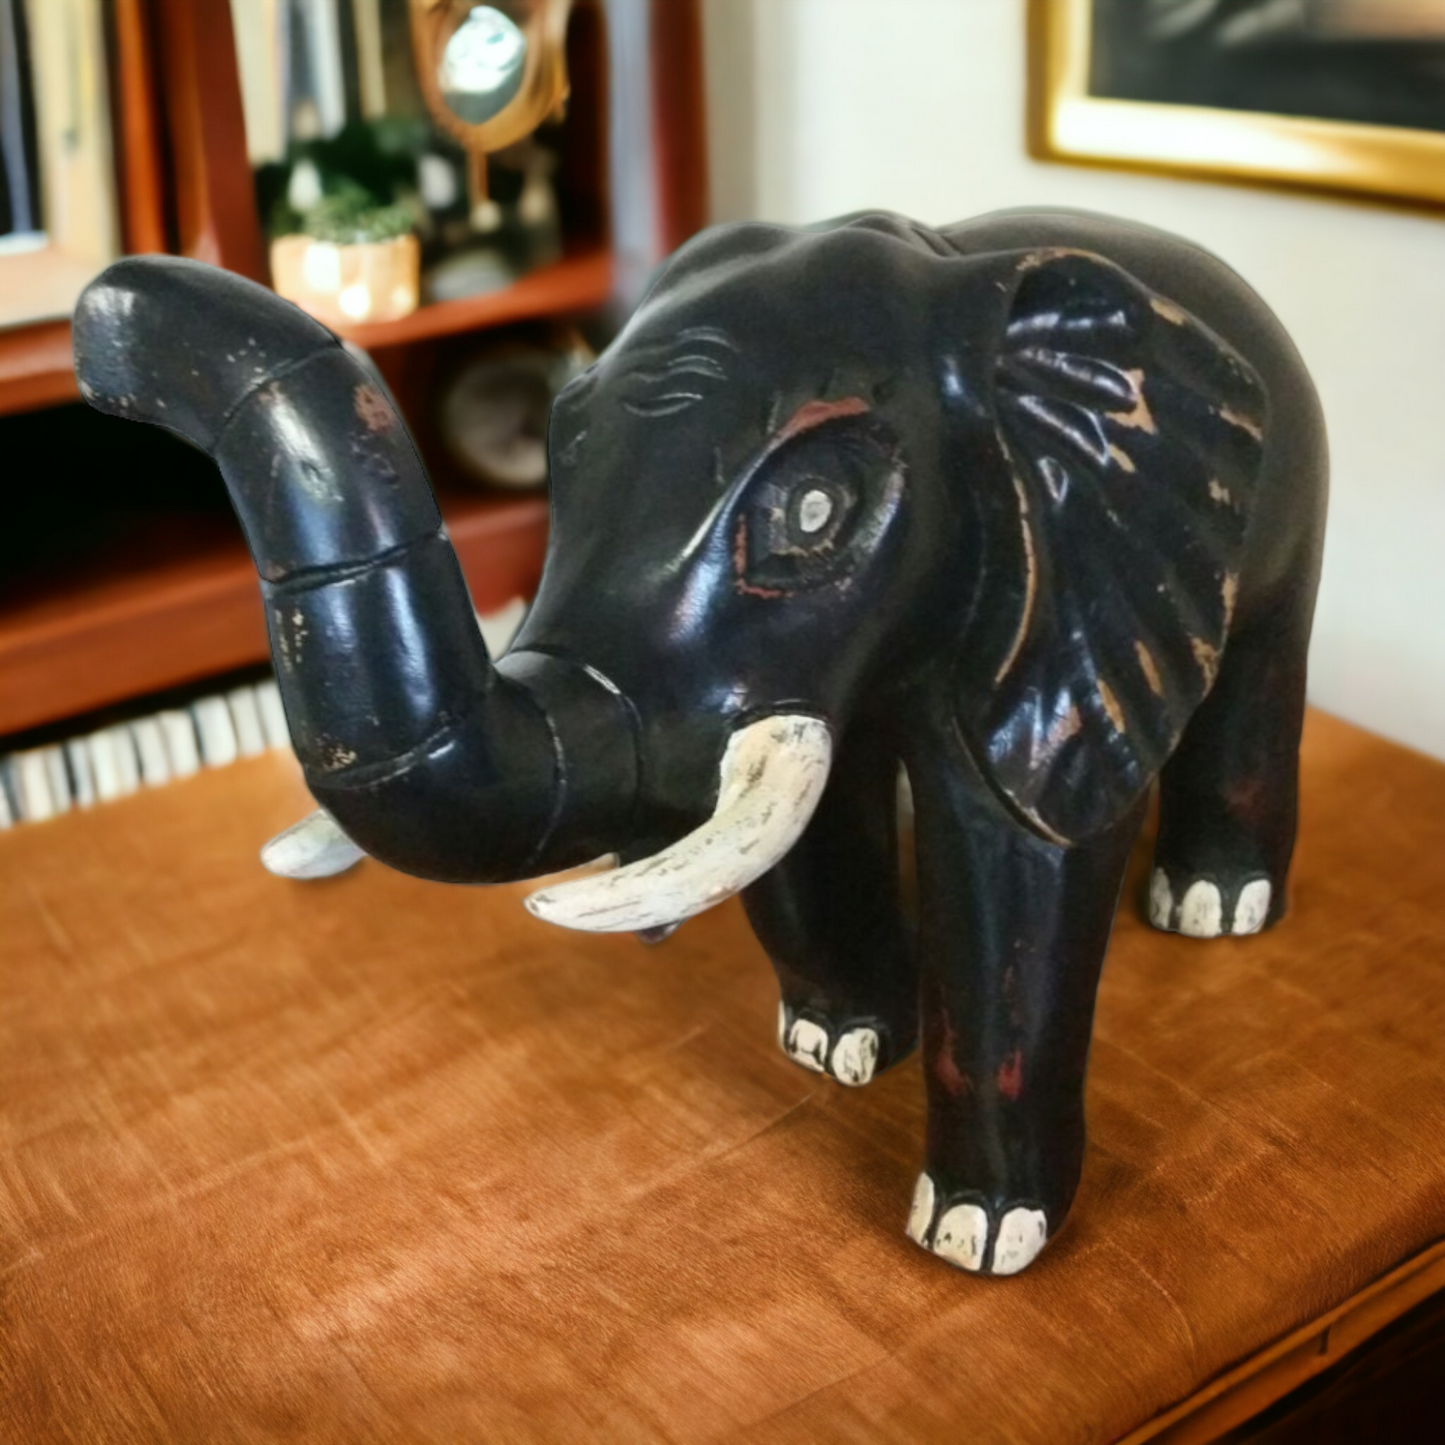 African Elephant Large Hand Carved Wooden Safari Decor